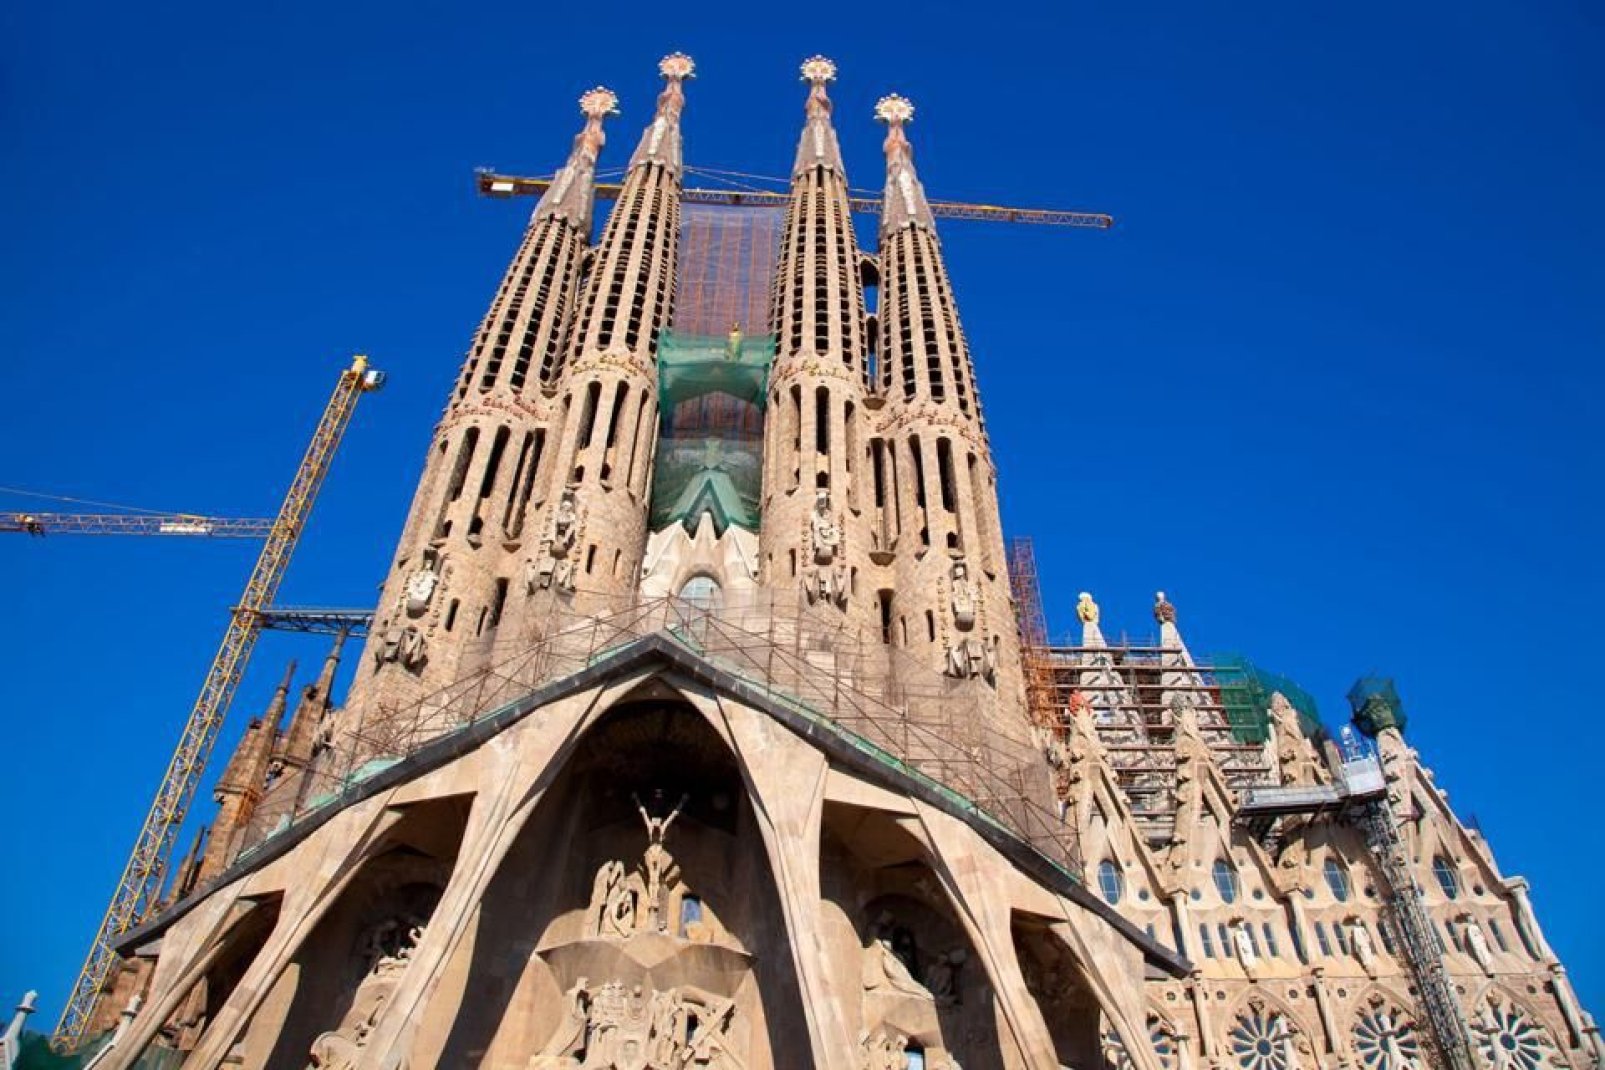 La Sagrada Familia was Antoni Gaudi's major work. It is the most visited monument in Spain and remains unfinished.